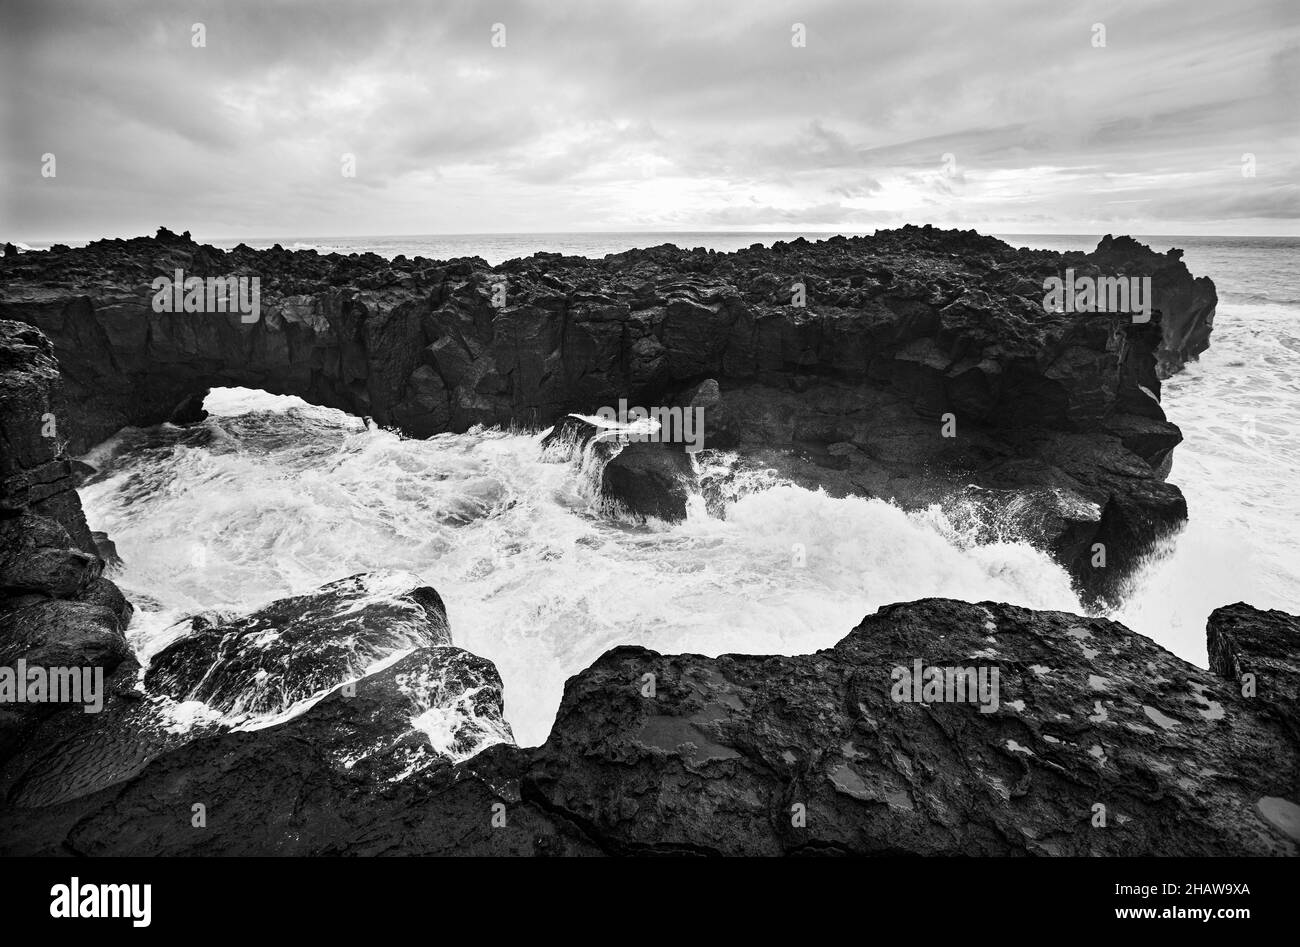 Lava arch on the volcanic coast at high tide with high waves, Ponta da Ferraria, Sao Miguel Island, Azores, Portugal Stock Photo